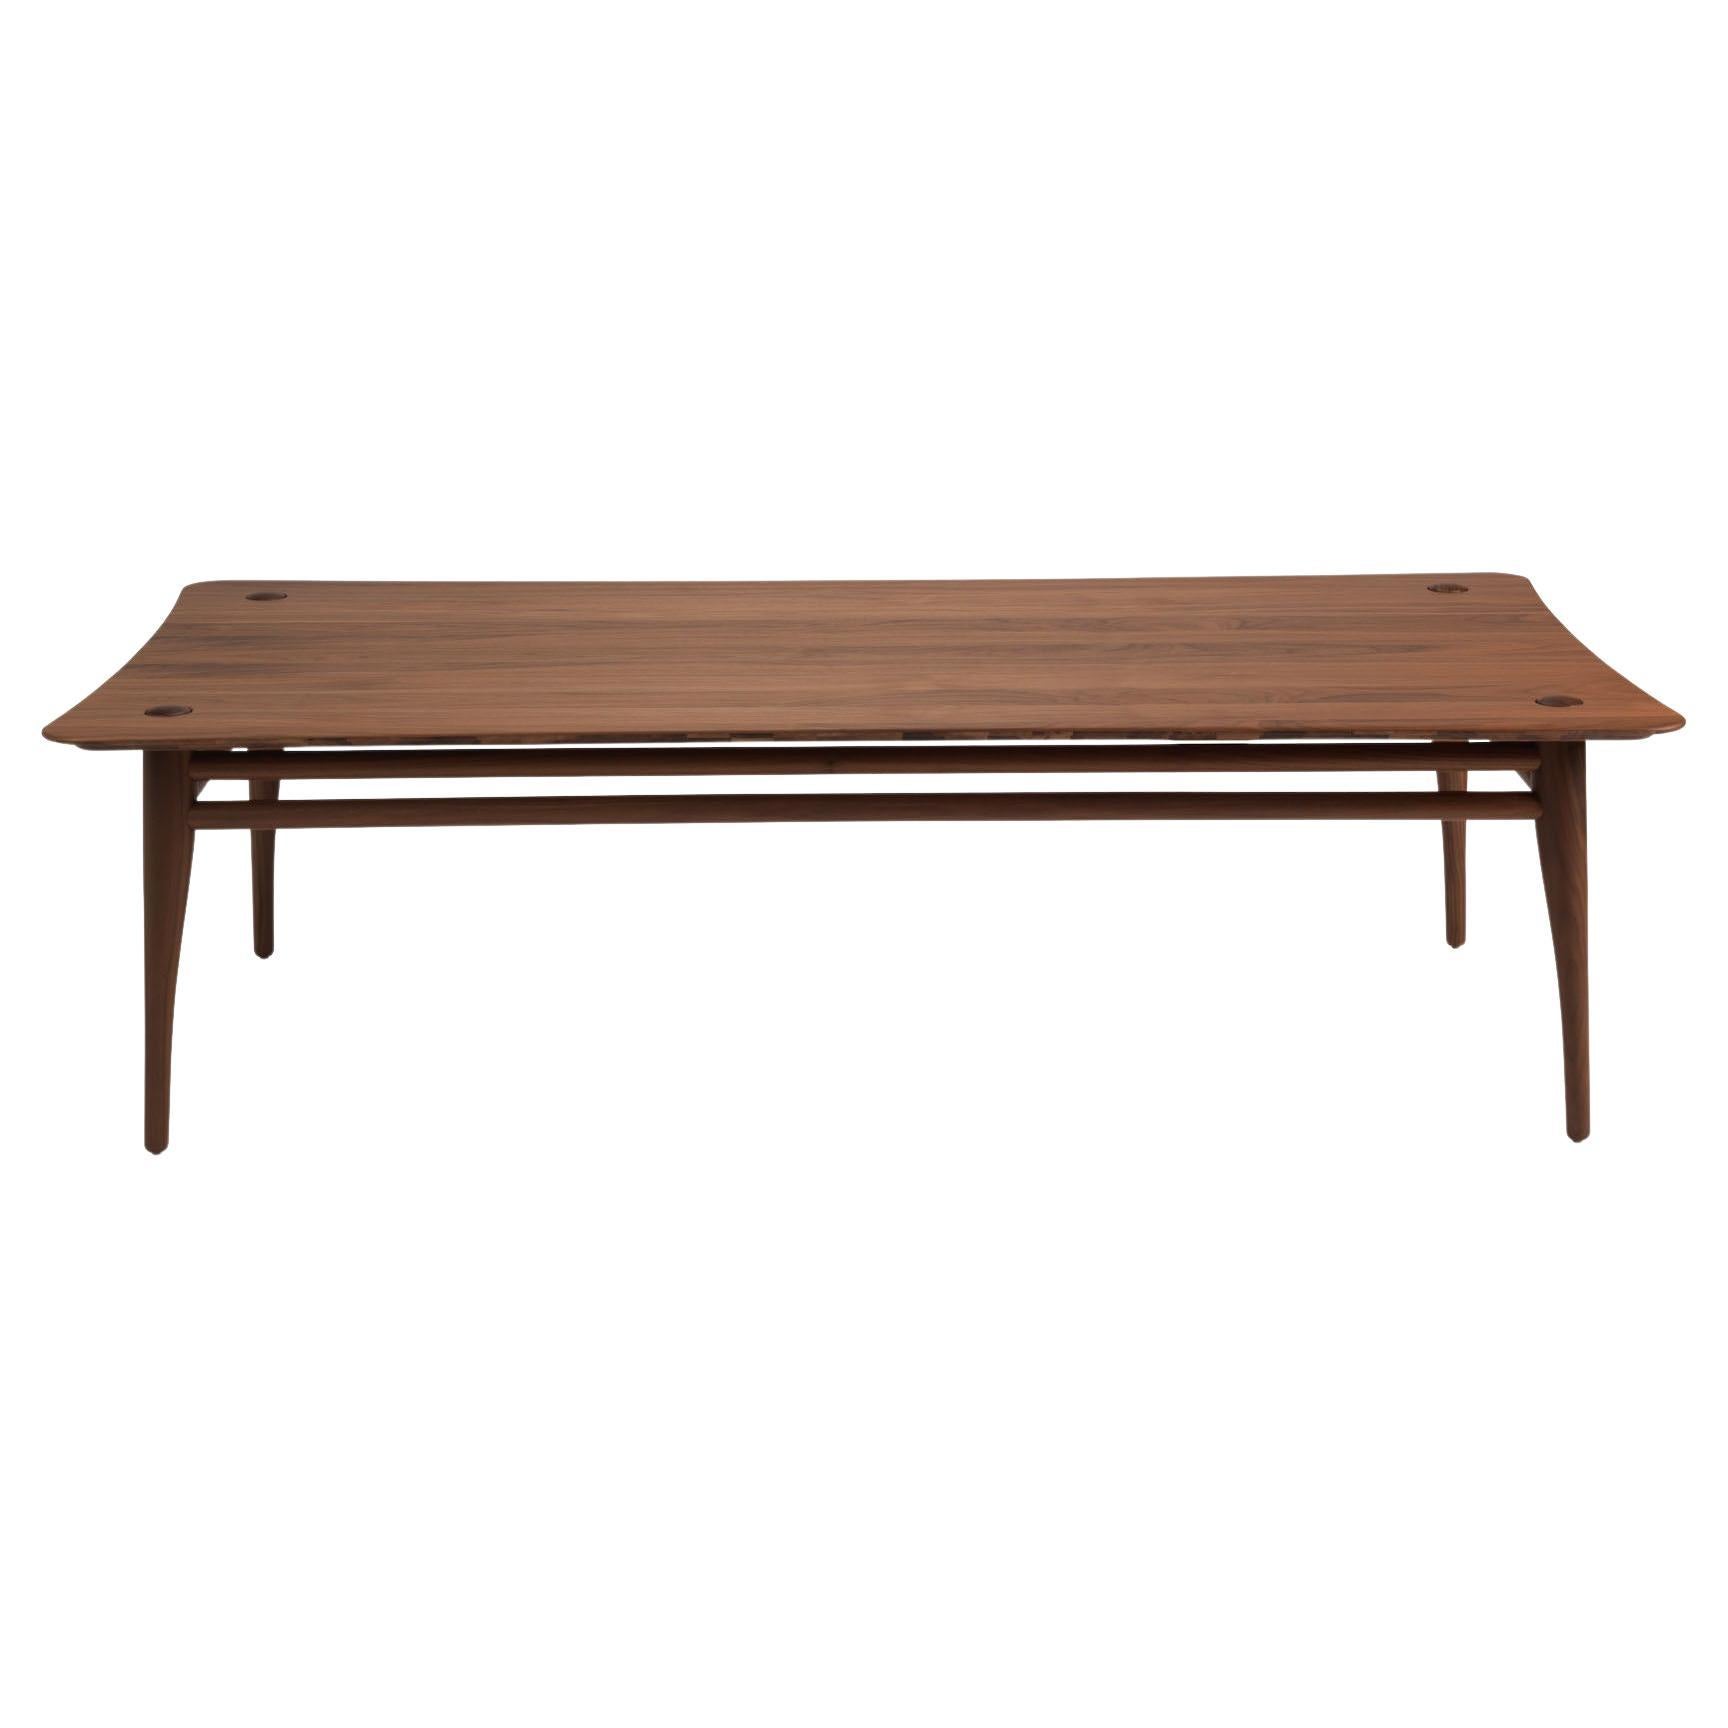 Revised Chilgrove - solid walnut coffee table - rectangle 120x60cm